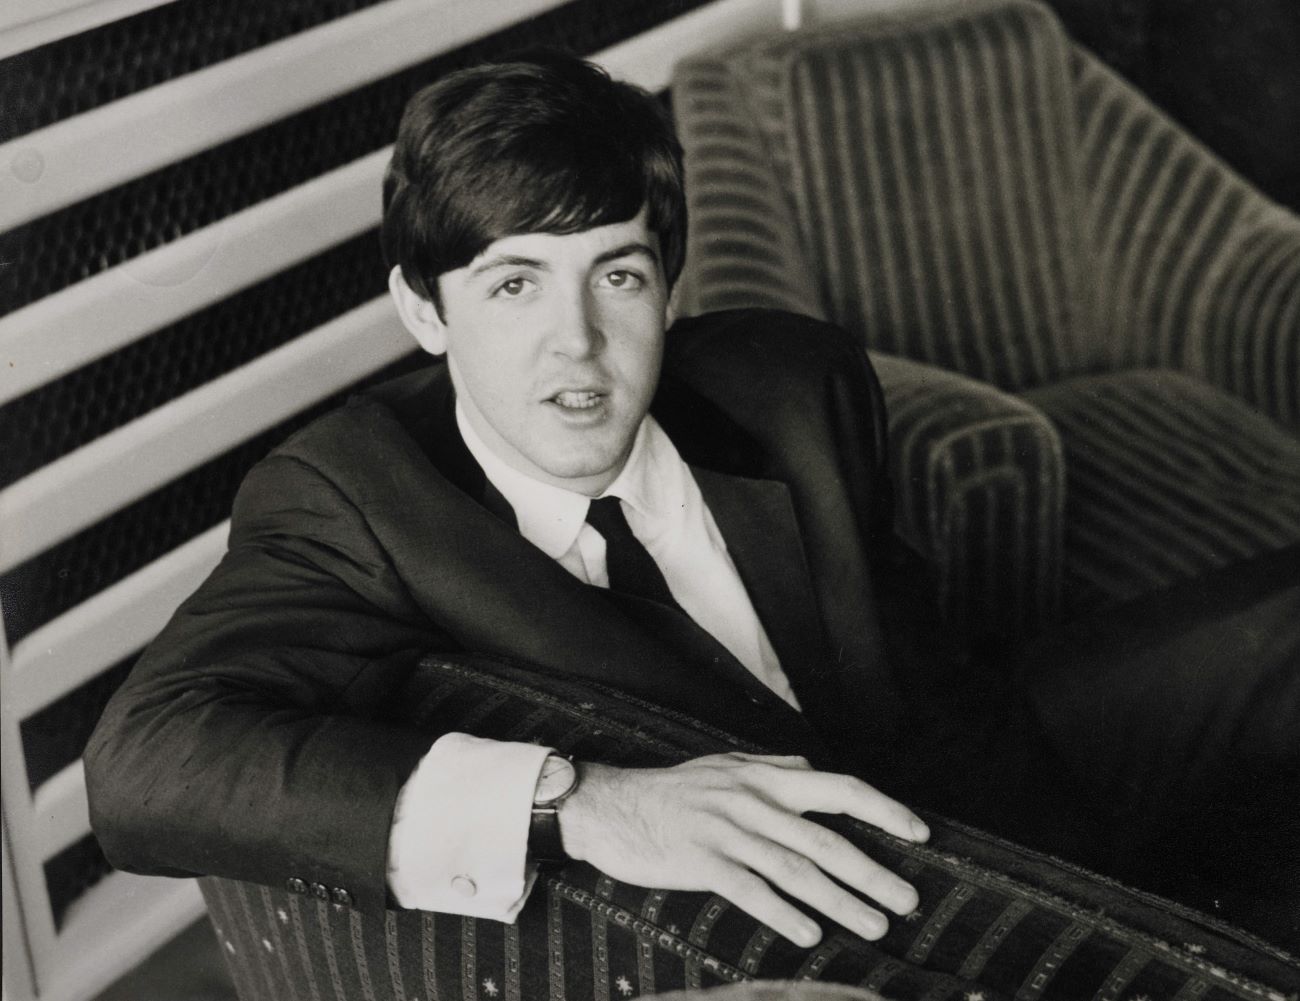 A black and white picture of musician and actor Paul McCartney wearing a suit and sitting in a chair.